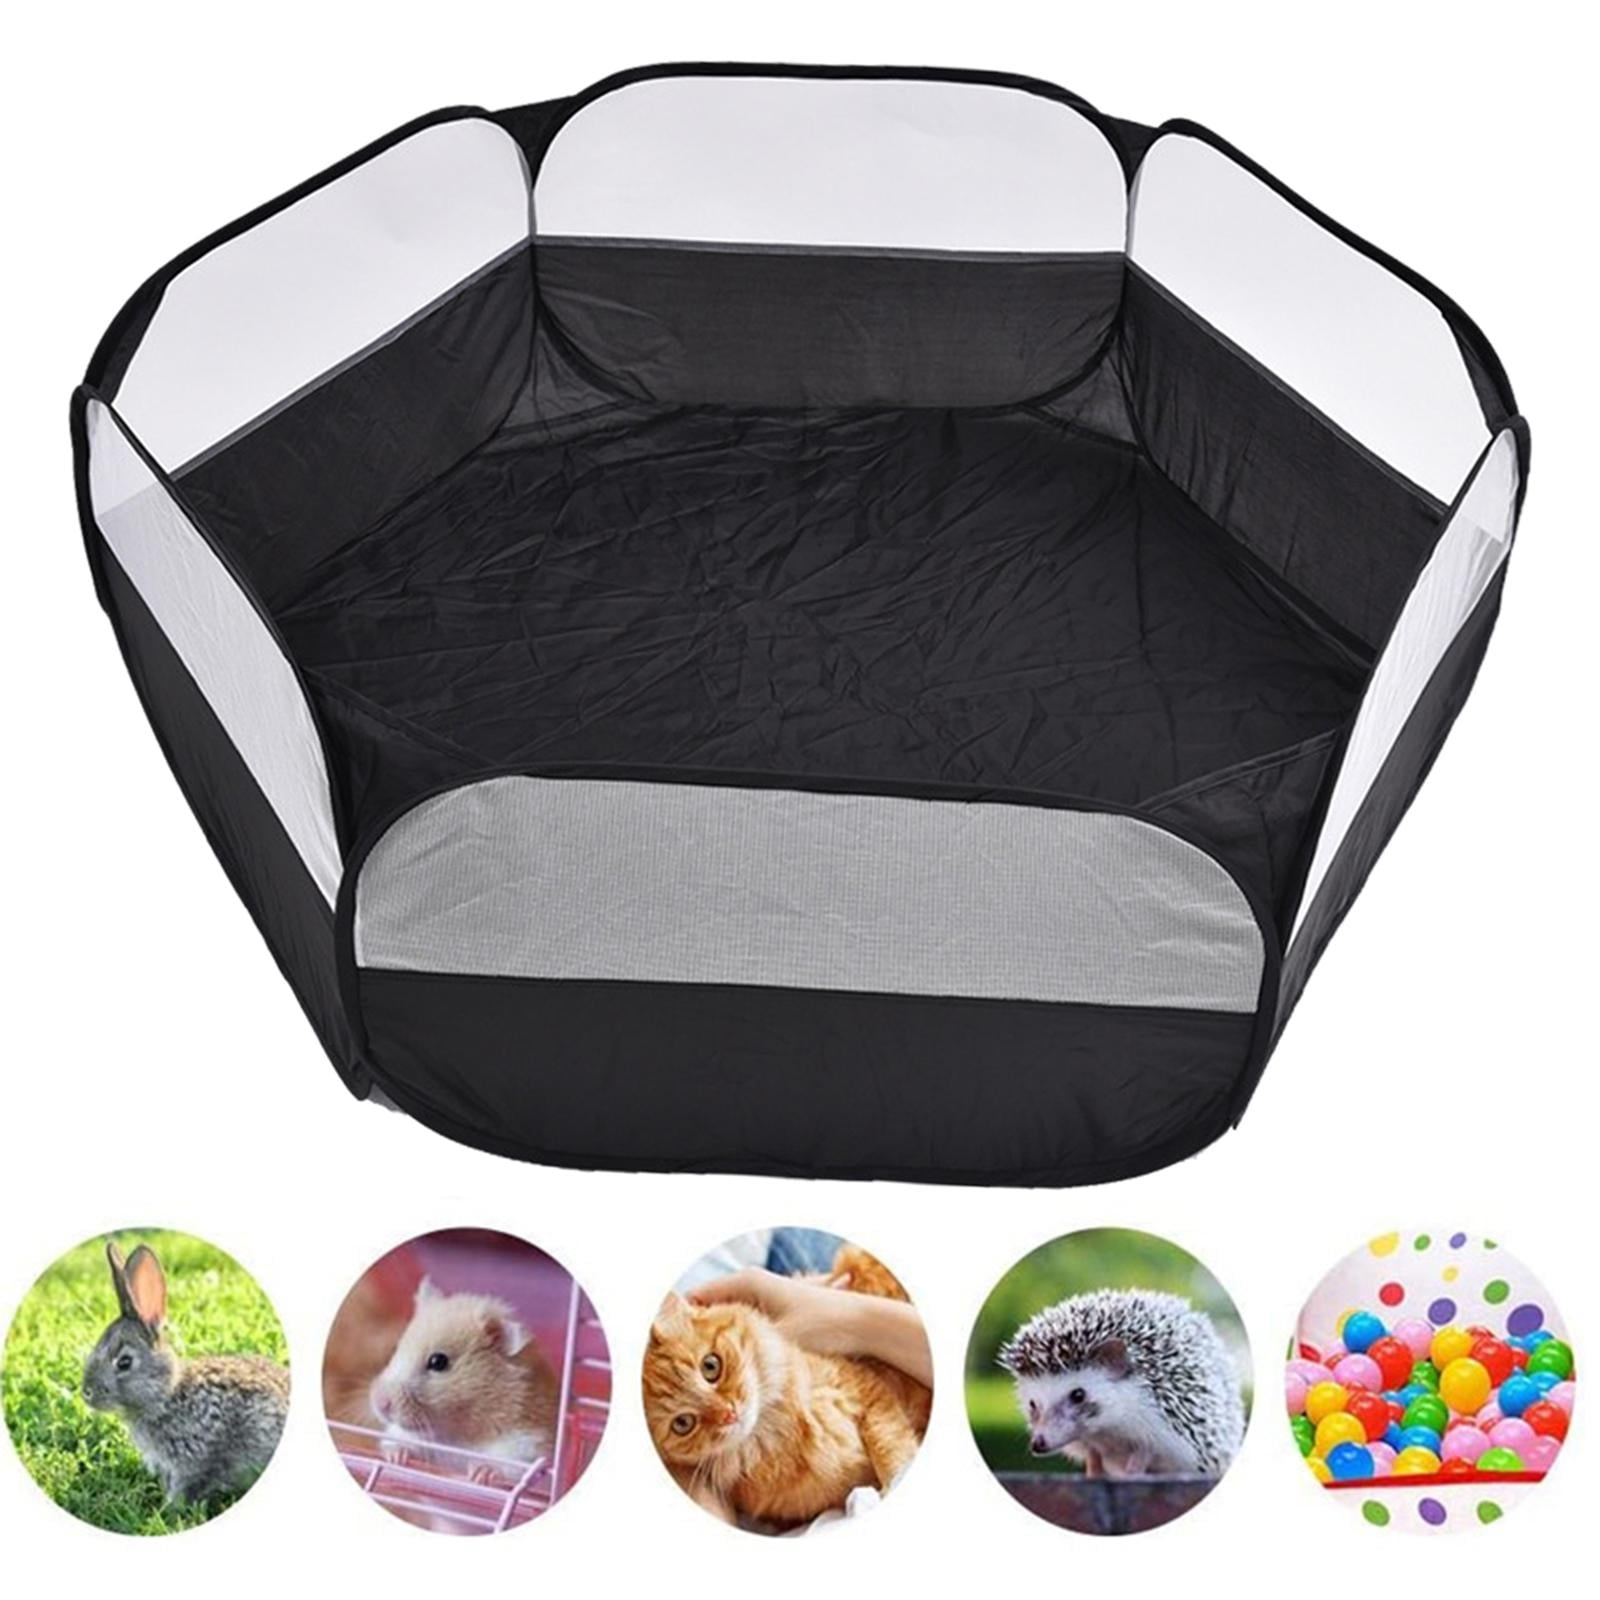 Portable Small Animal Playpen Breathable Pet Playpen Cage Tent with Zippered Fence Tent Outdoor&Indoor Exercise Tent without cover - Walmart.com